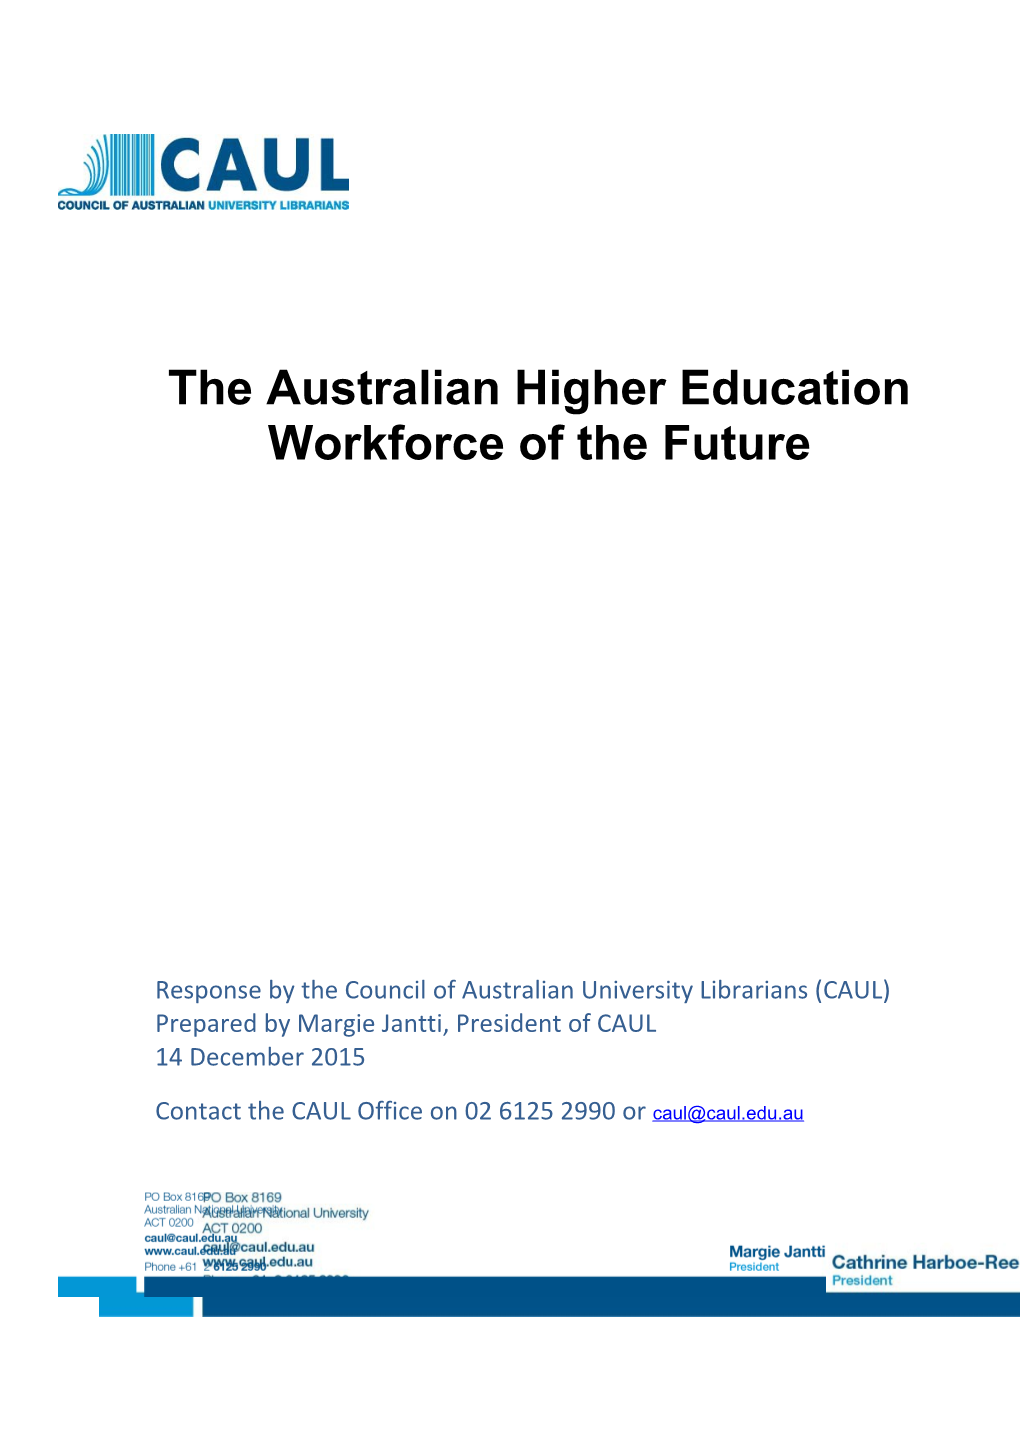 The Australian Higher Education Workforce of the Future